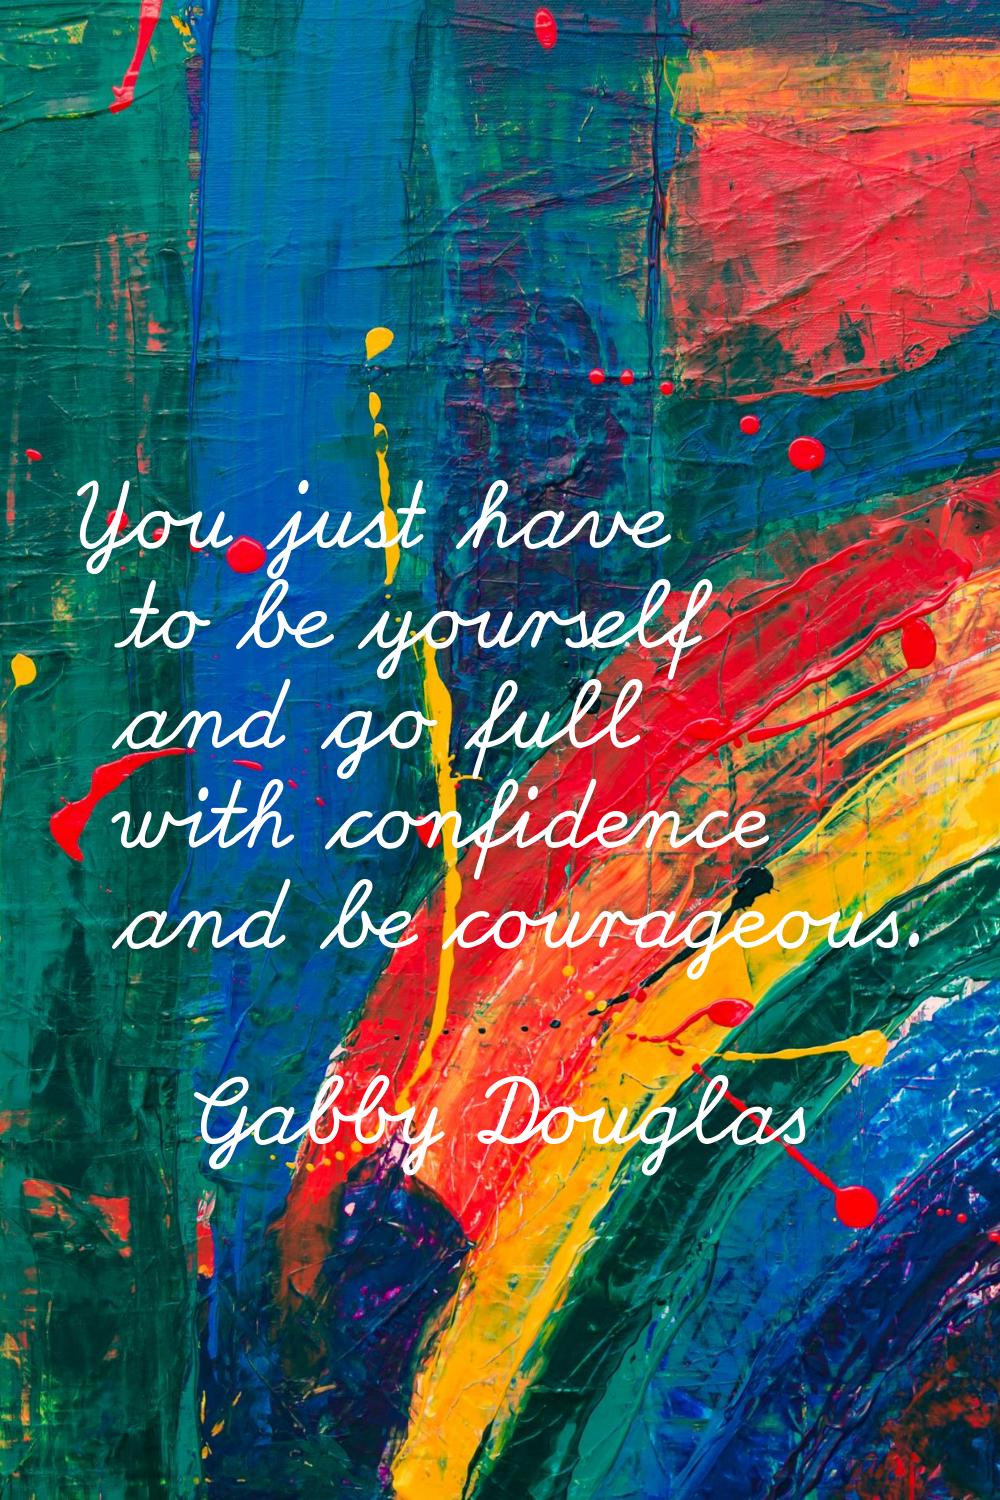 You just have to be yourself and go full with confidence and be courageous.